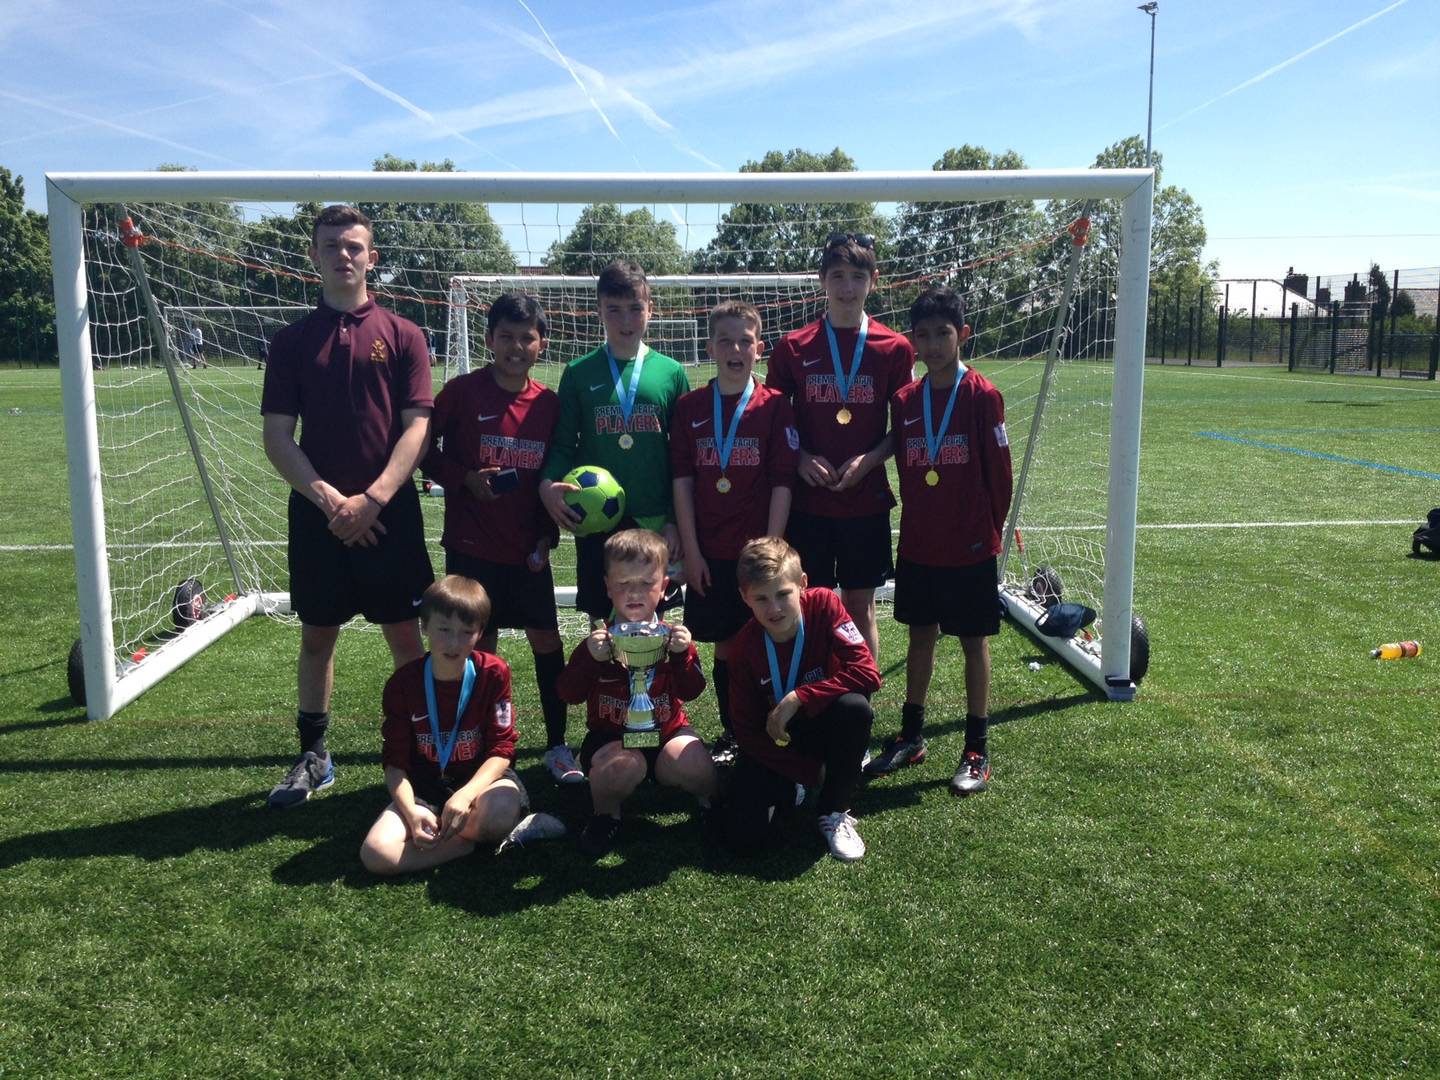 Asa and his football team on the pitch with their league trophy